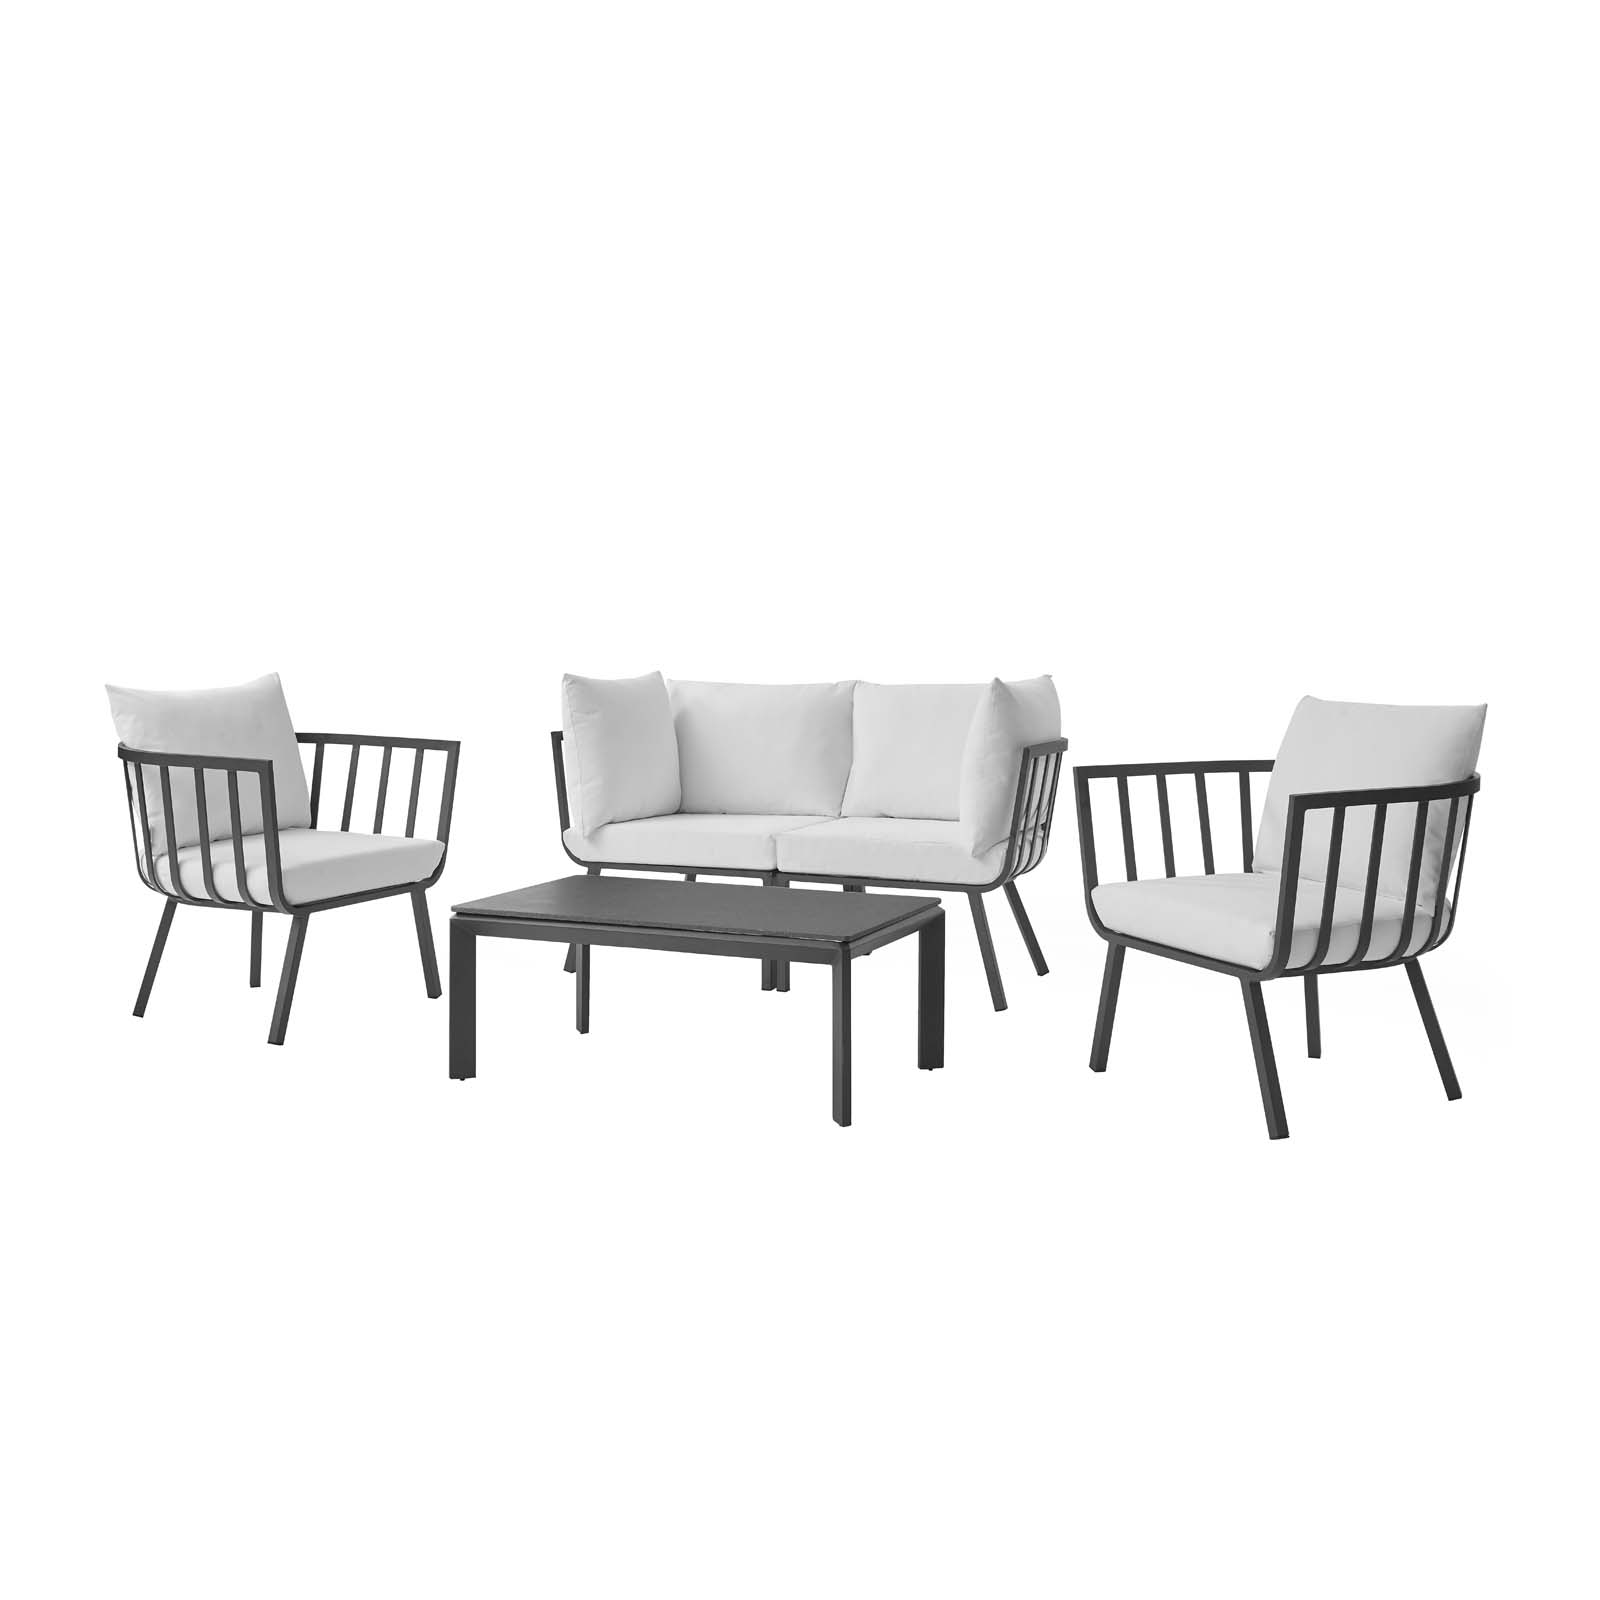 Lounge Sectional Sofa Chair Set, Aluminum, Metal, Steel, Grey Gray White, Modern Contemporary Urban Design, Outdoor Patio Balcony Cafe Bistro Garden Furniture Hotel Hospitality - image 1 of 10